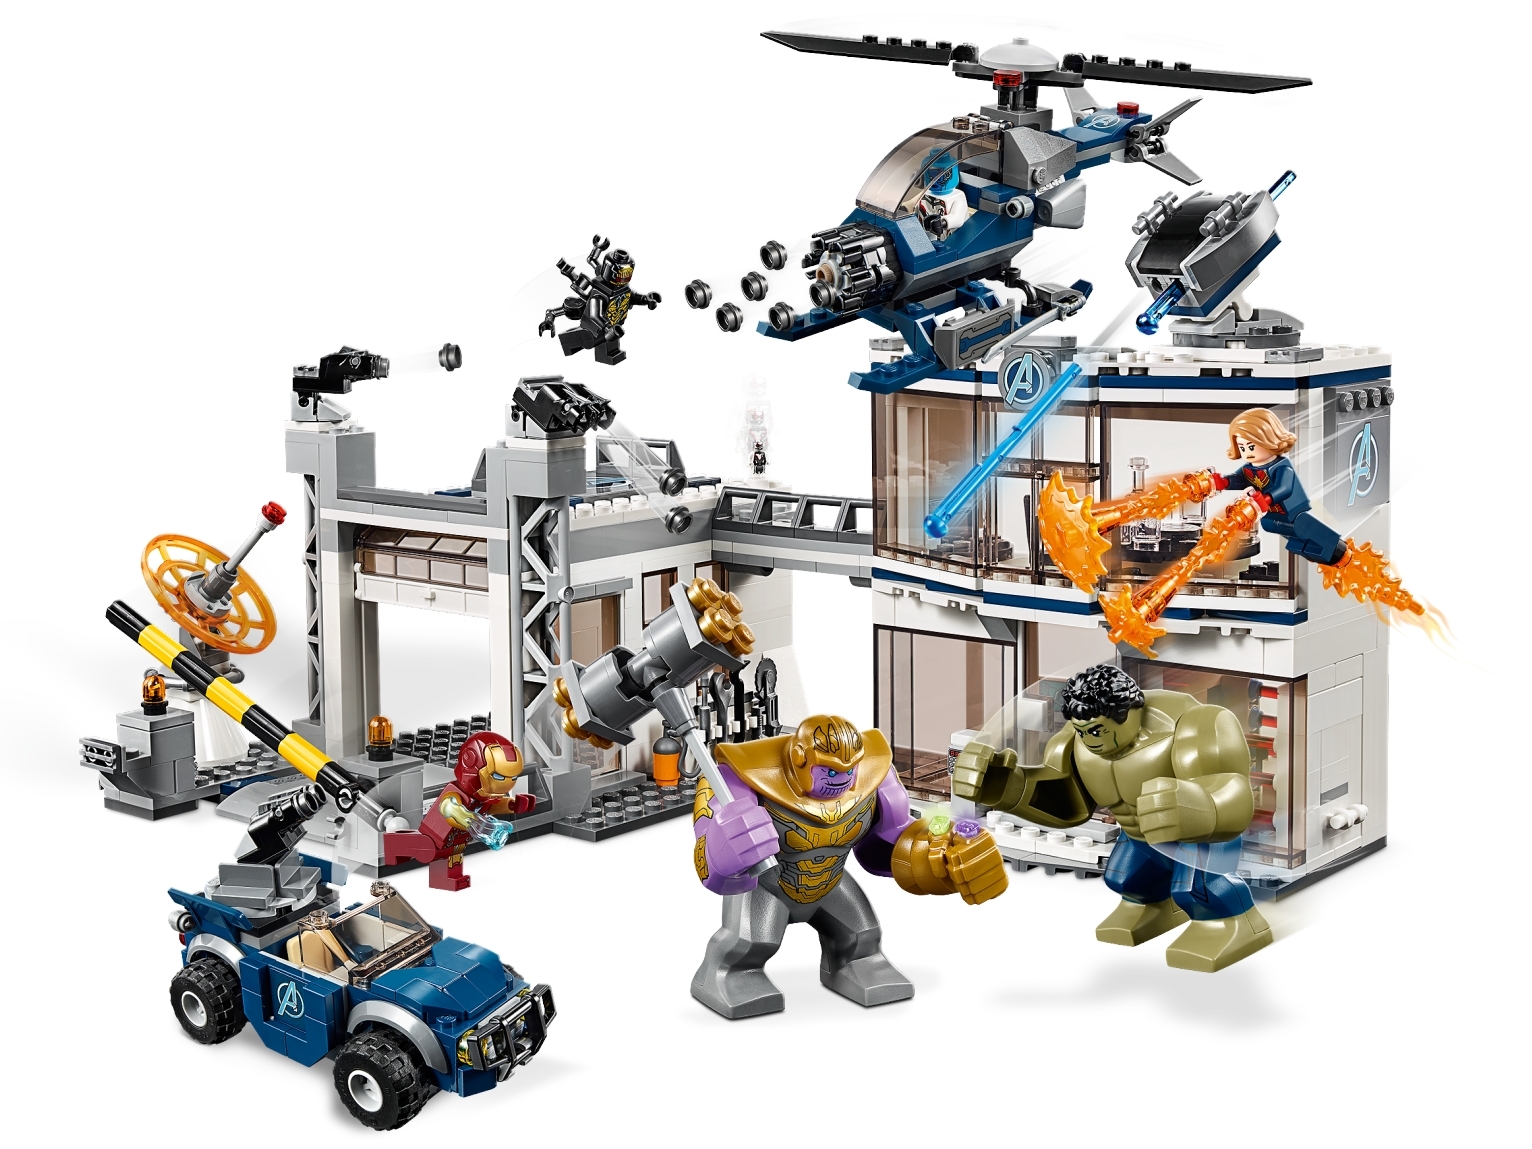 Avengers Compound Battle 76131 | Marvel | Buy online at the